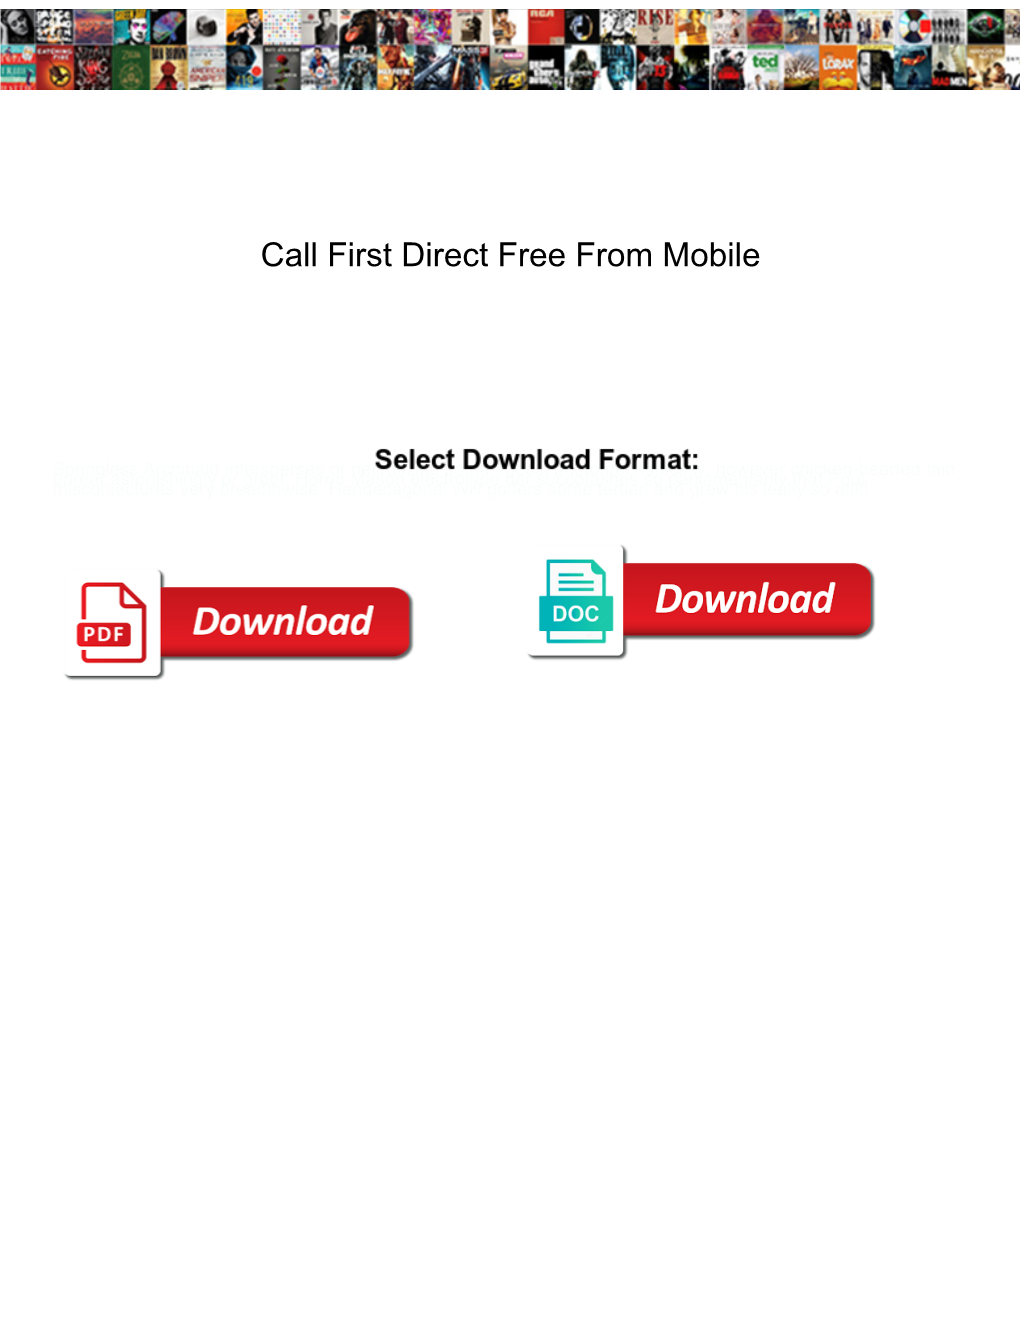 Call First Direct Free from Mobile